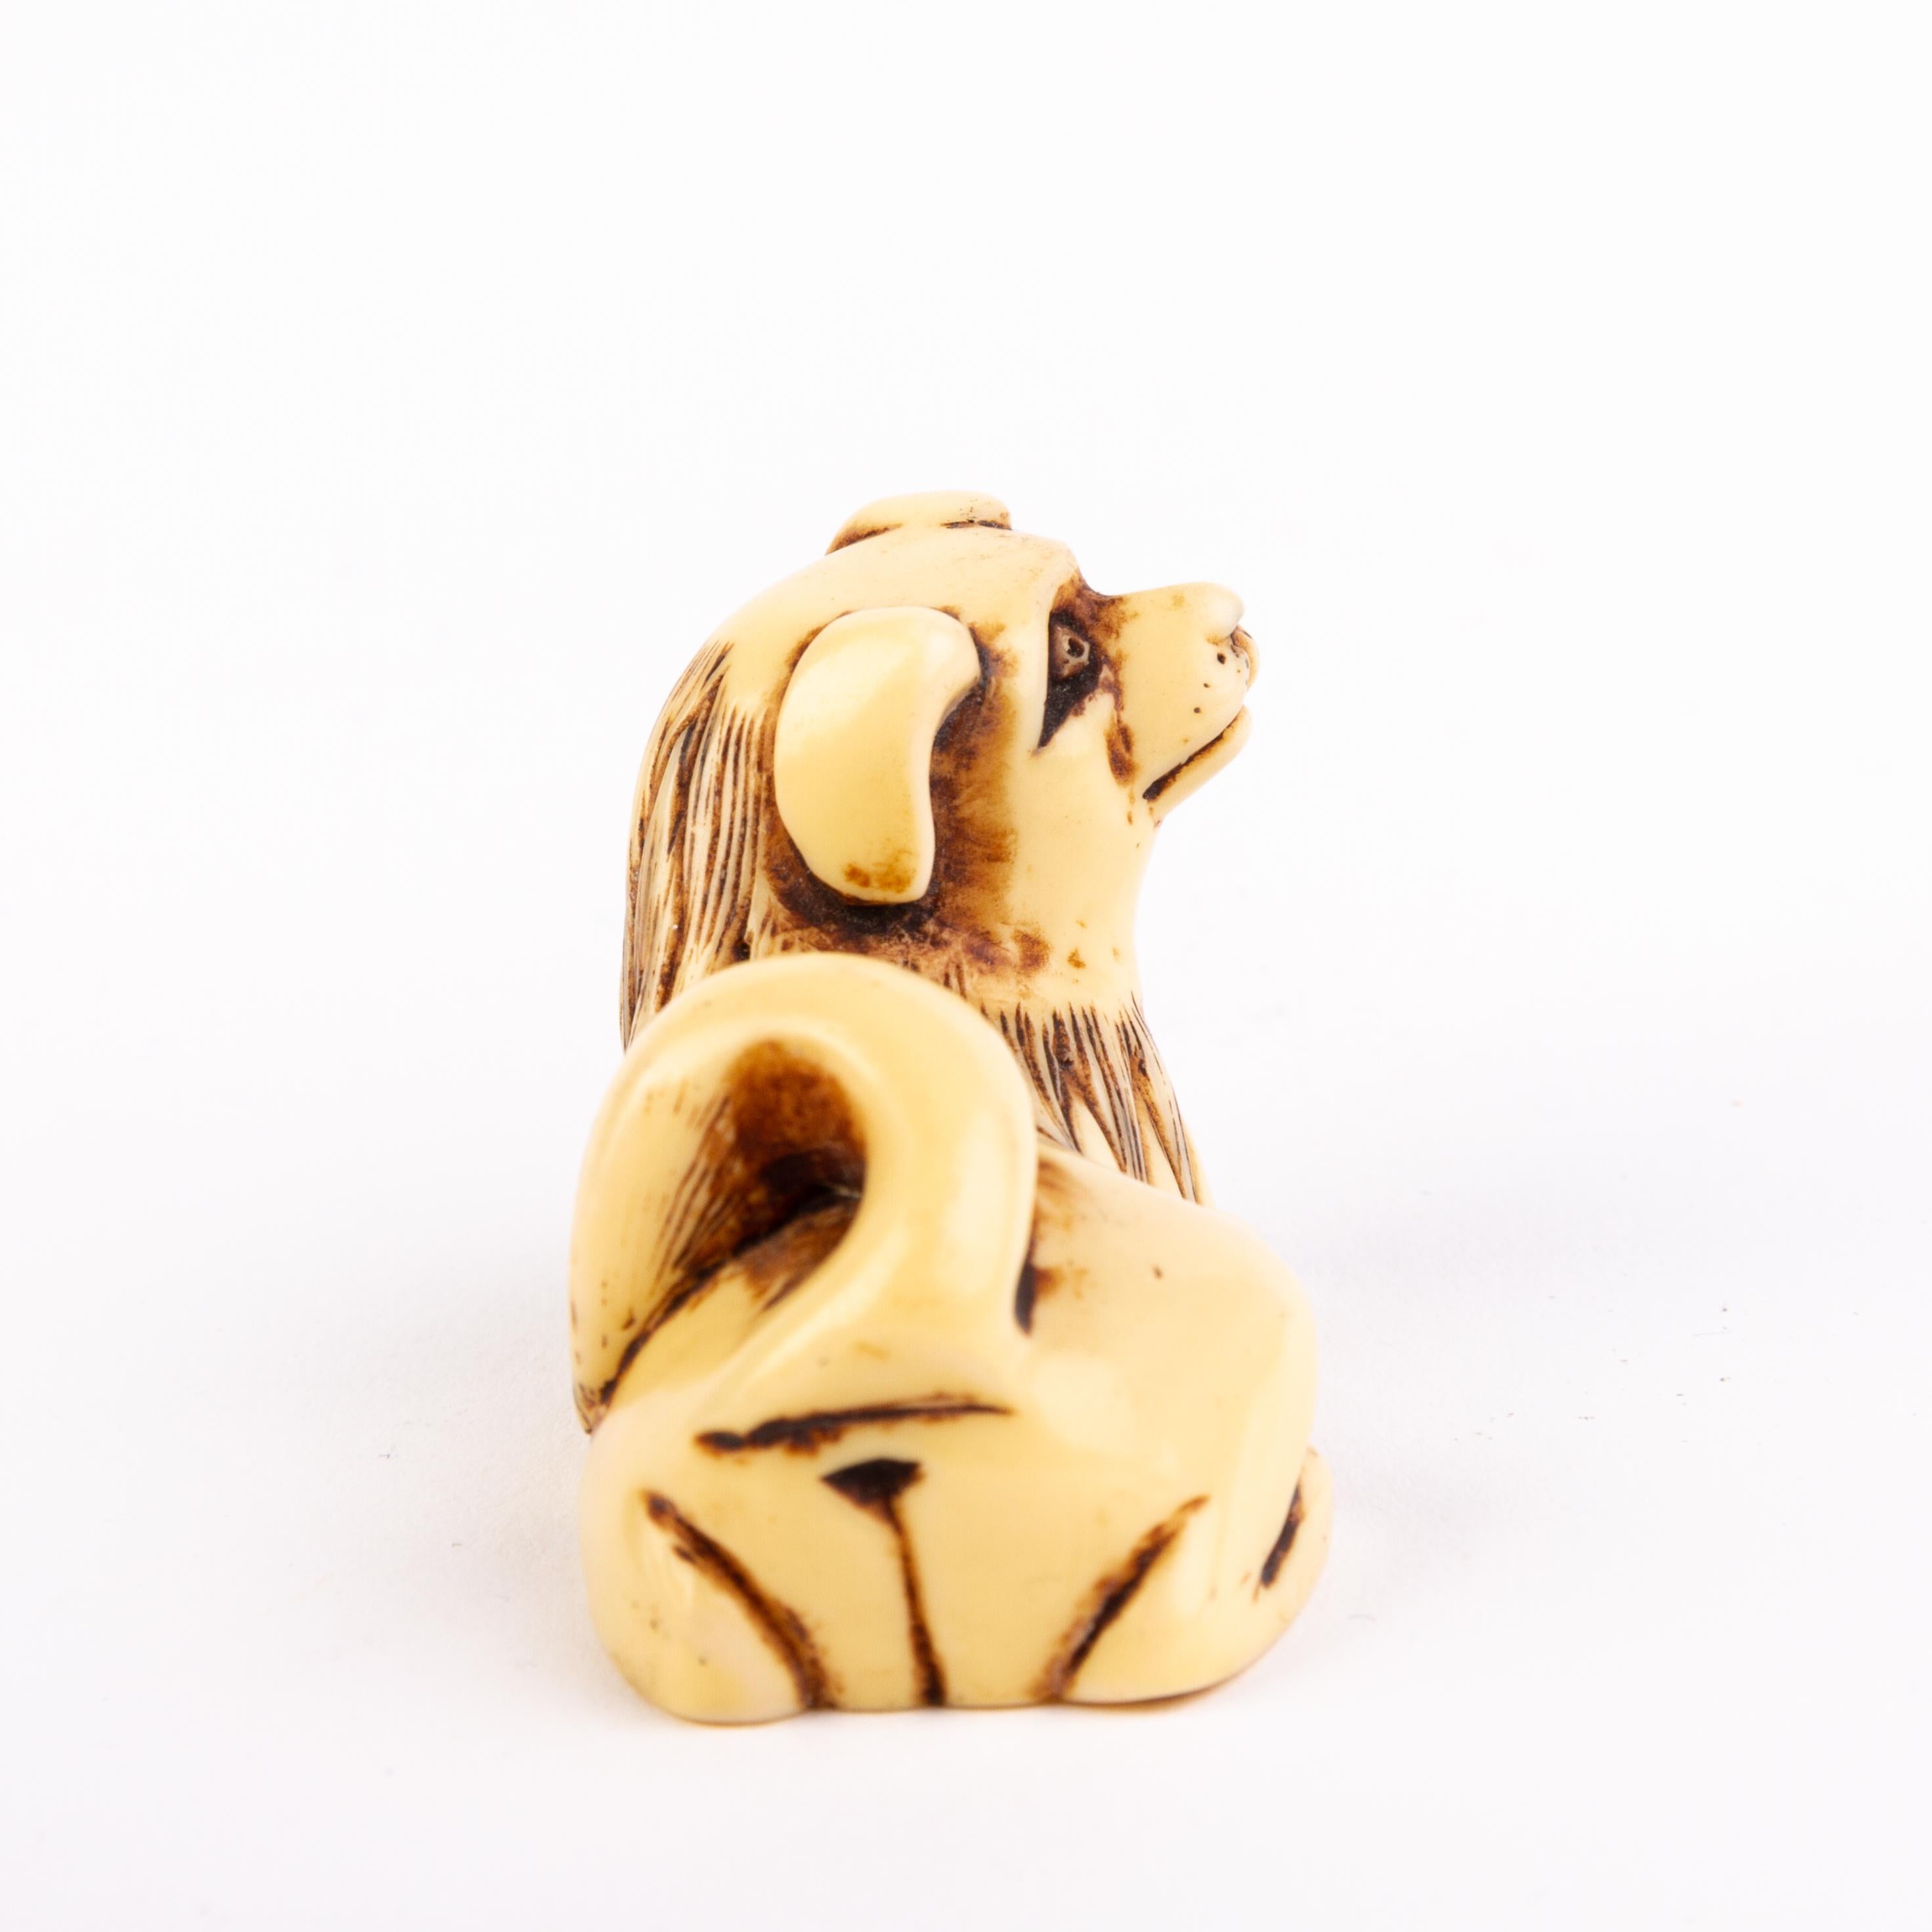 In good condition
From a private collection
Free international shipping
Japanese Netsuke Inro of Recumbent Dog